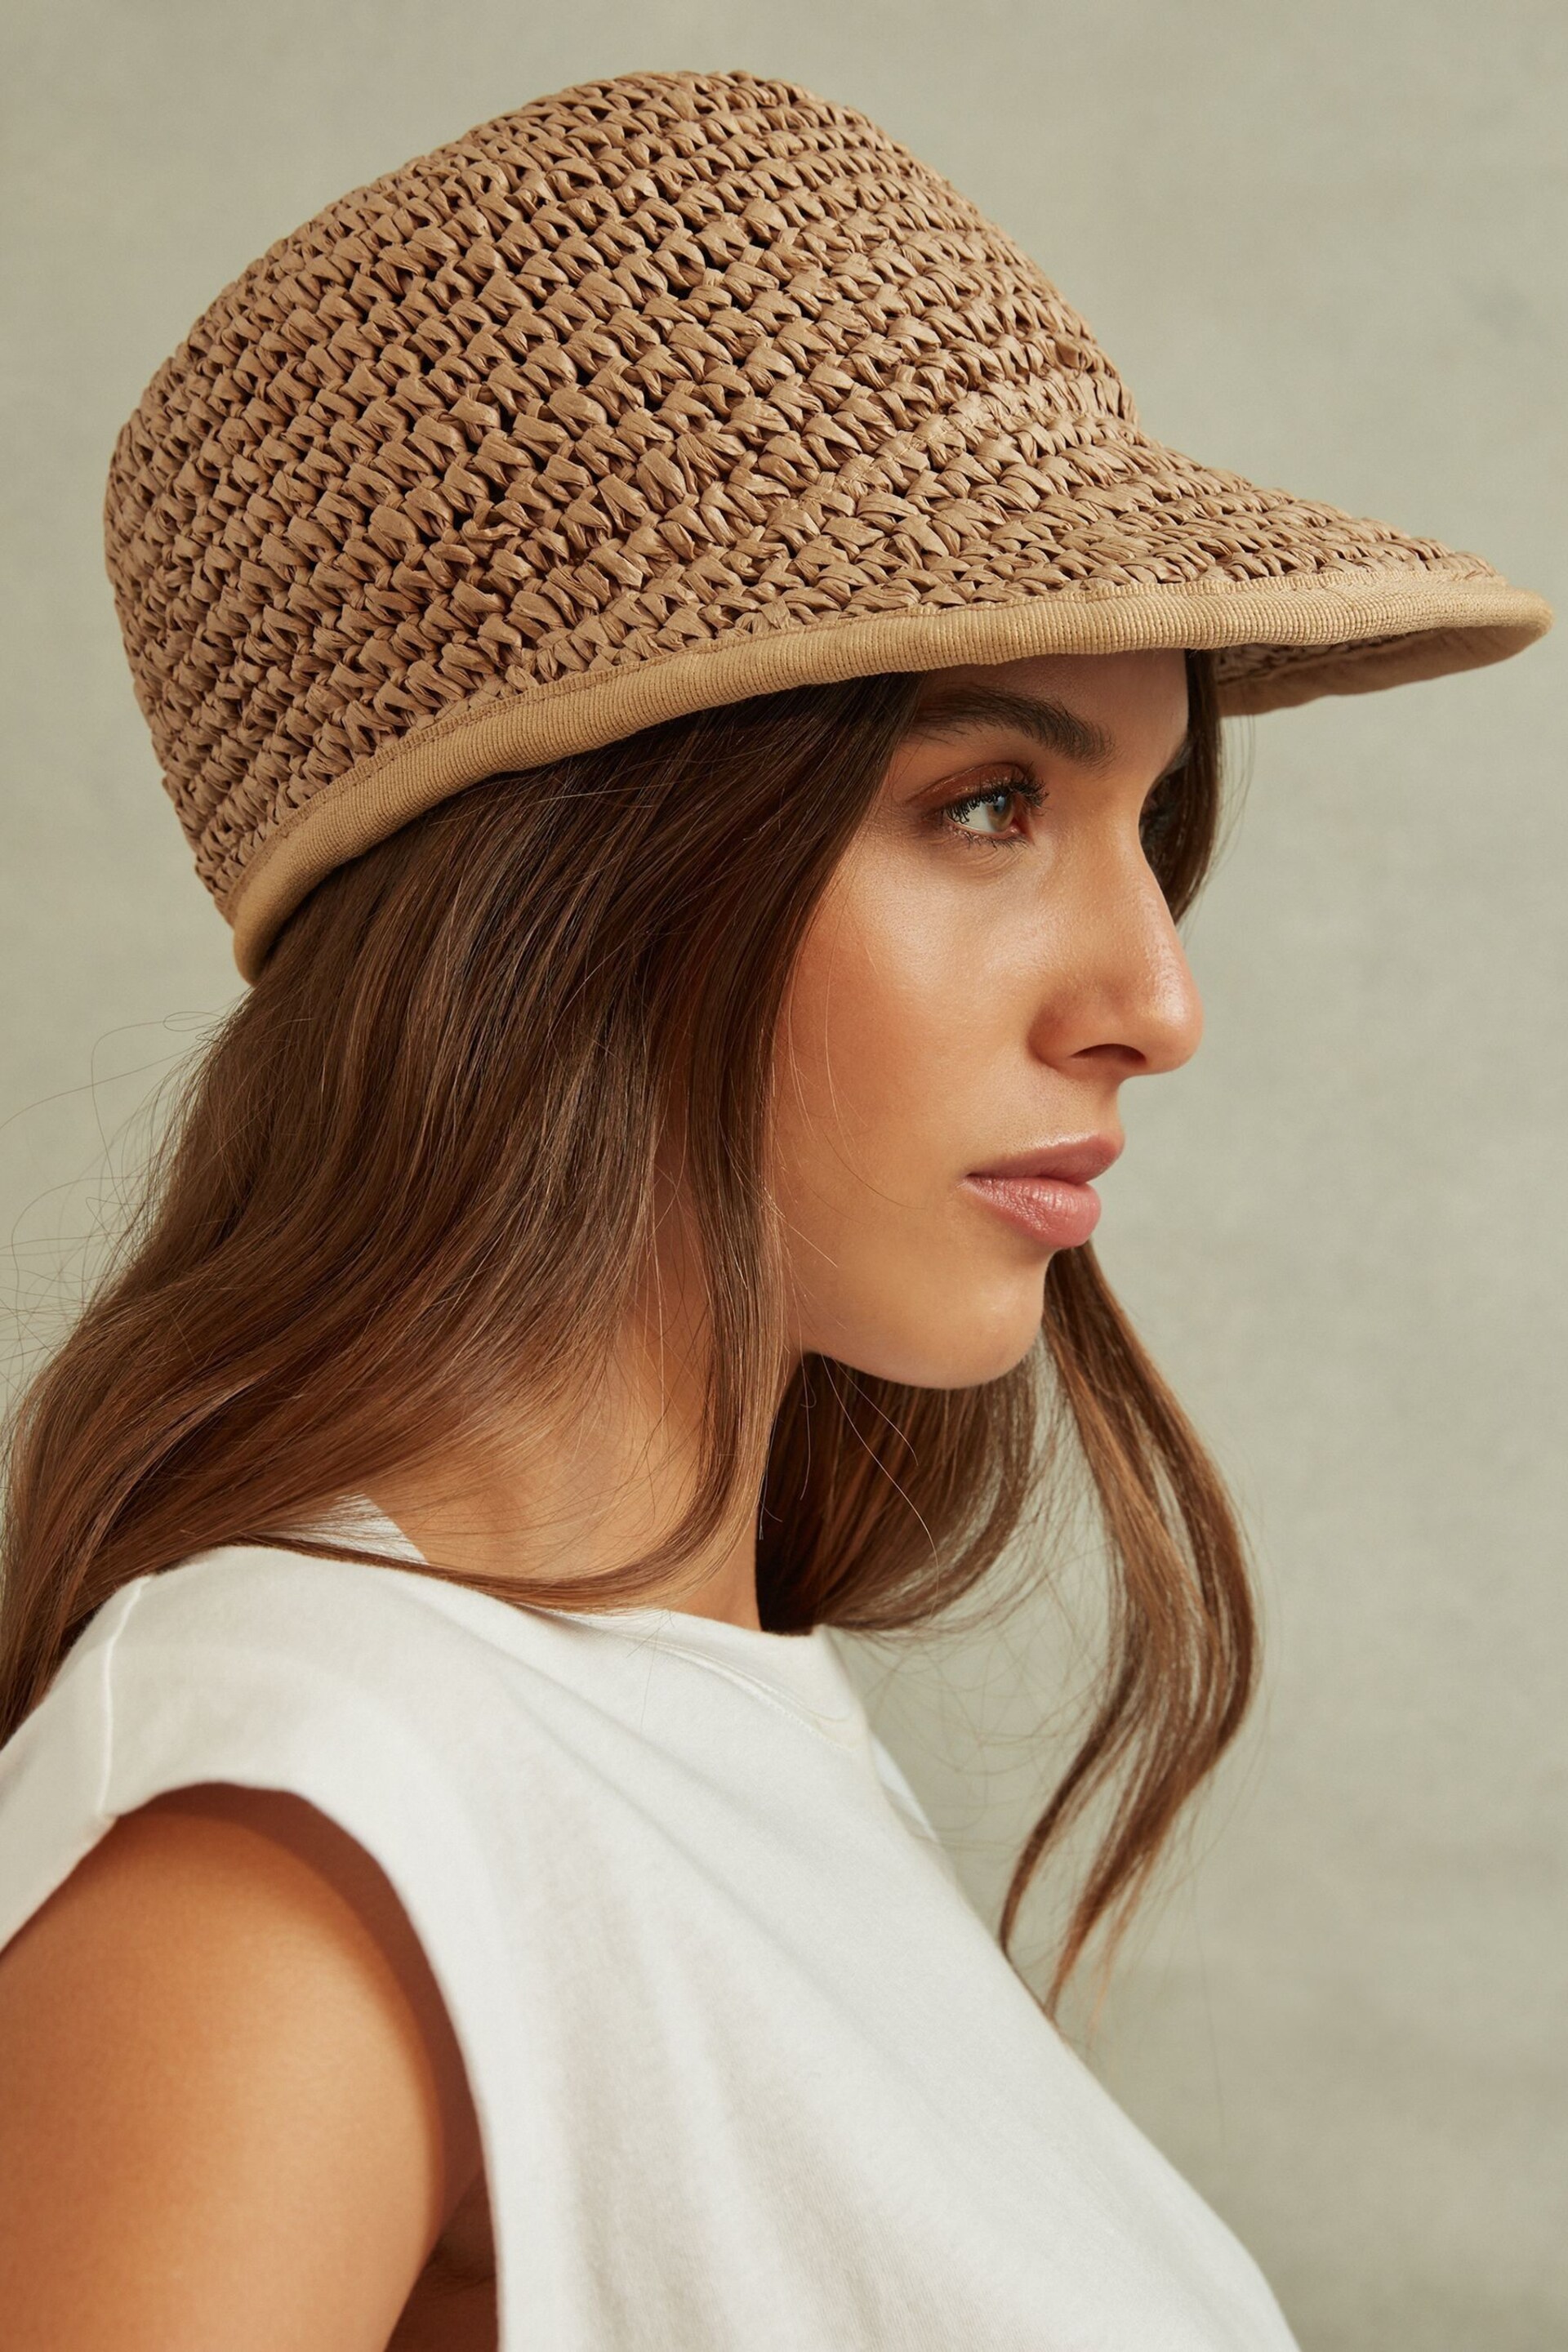 Reiss Natural Penelope Woven Straw Cap - Image 2 of 4